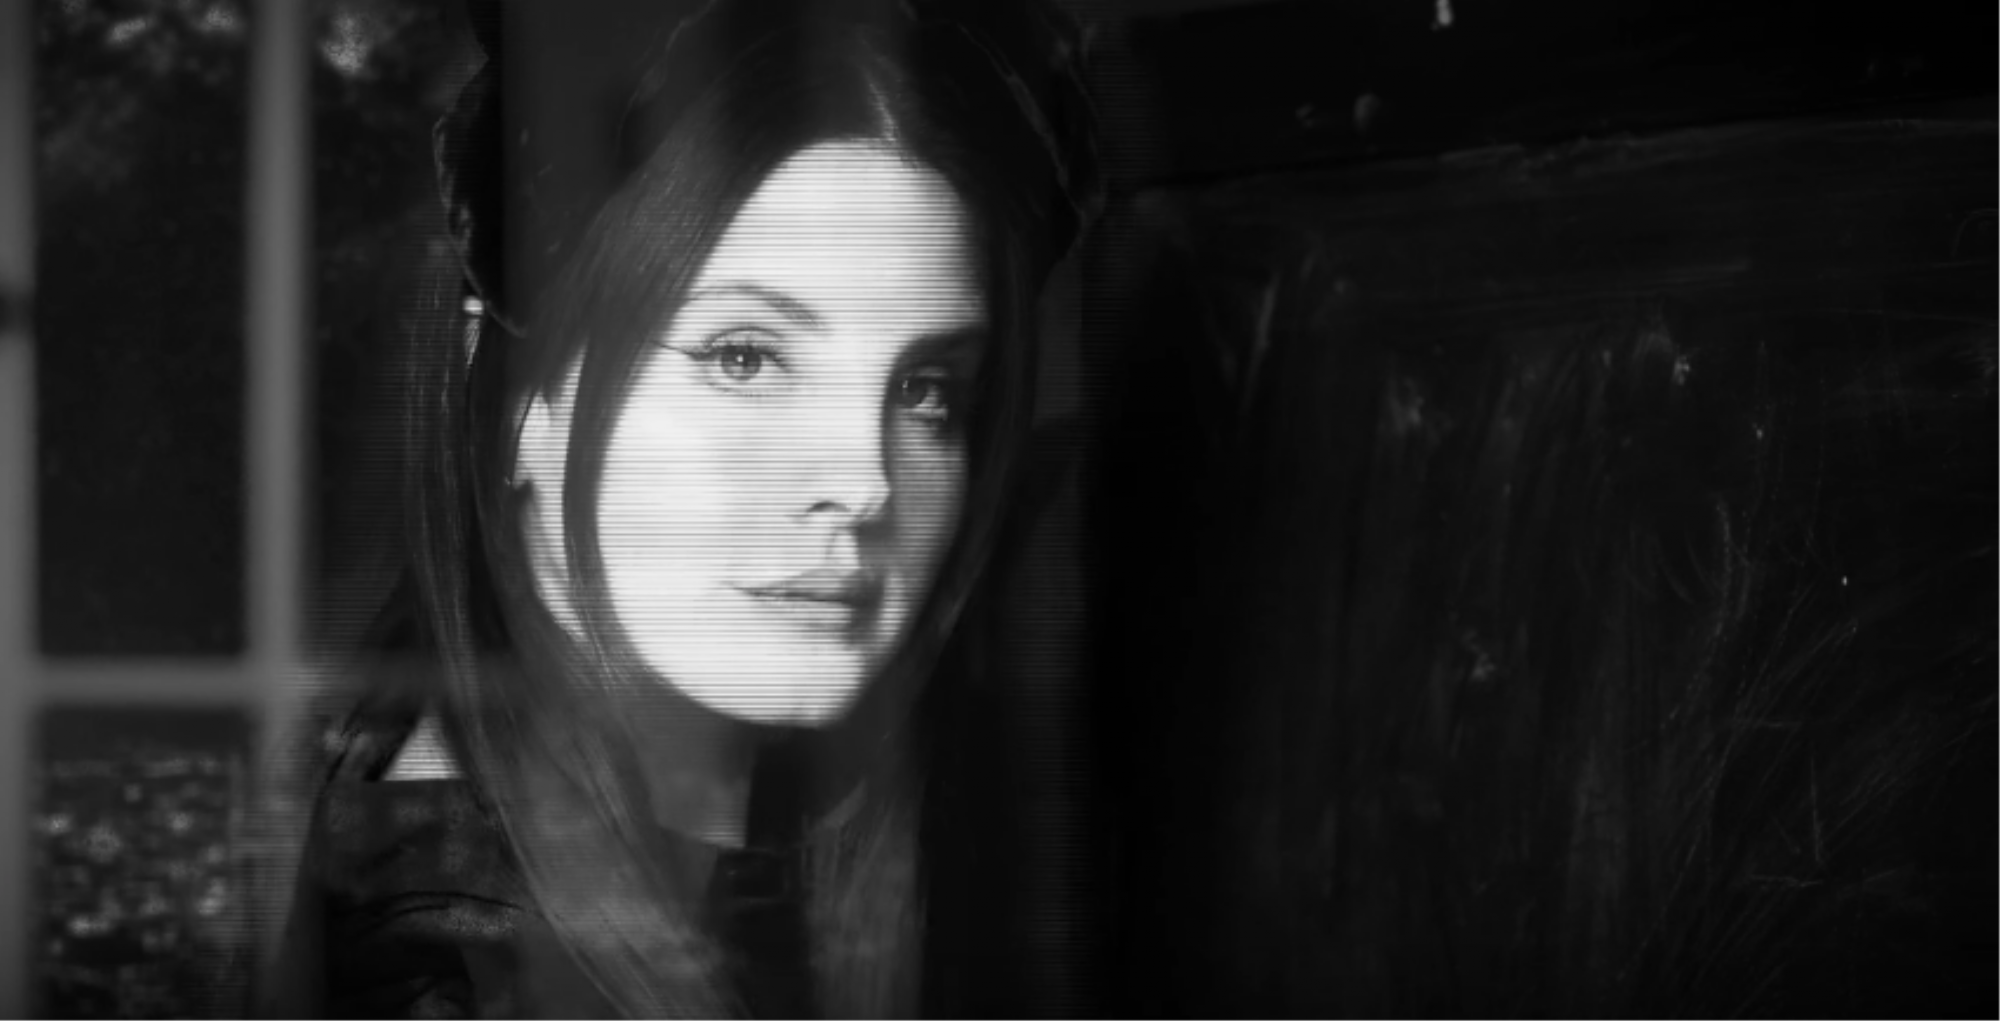 Lana Del Rey Reflects On The State Of The World In New Record Trailer